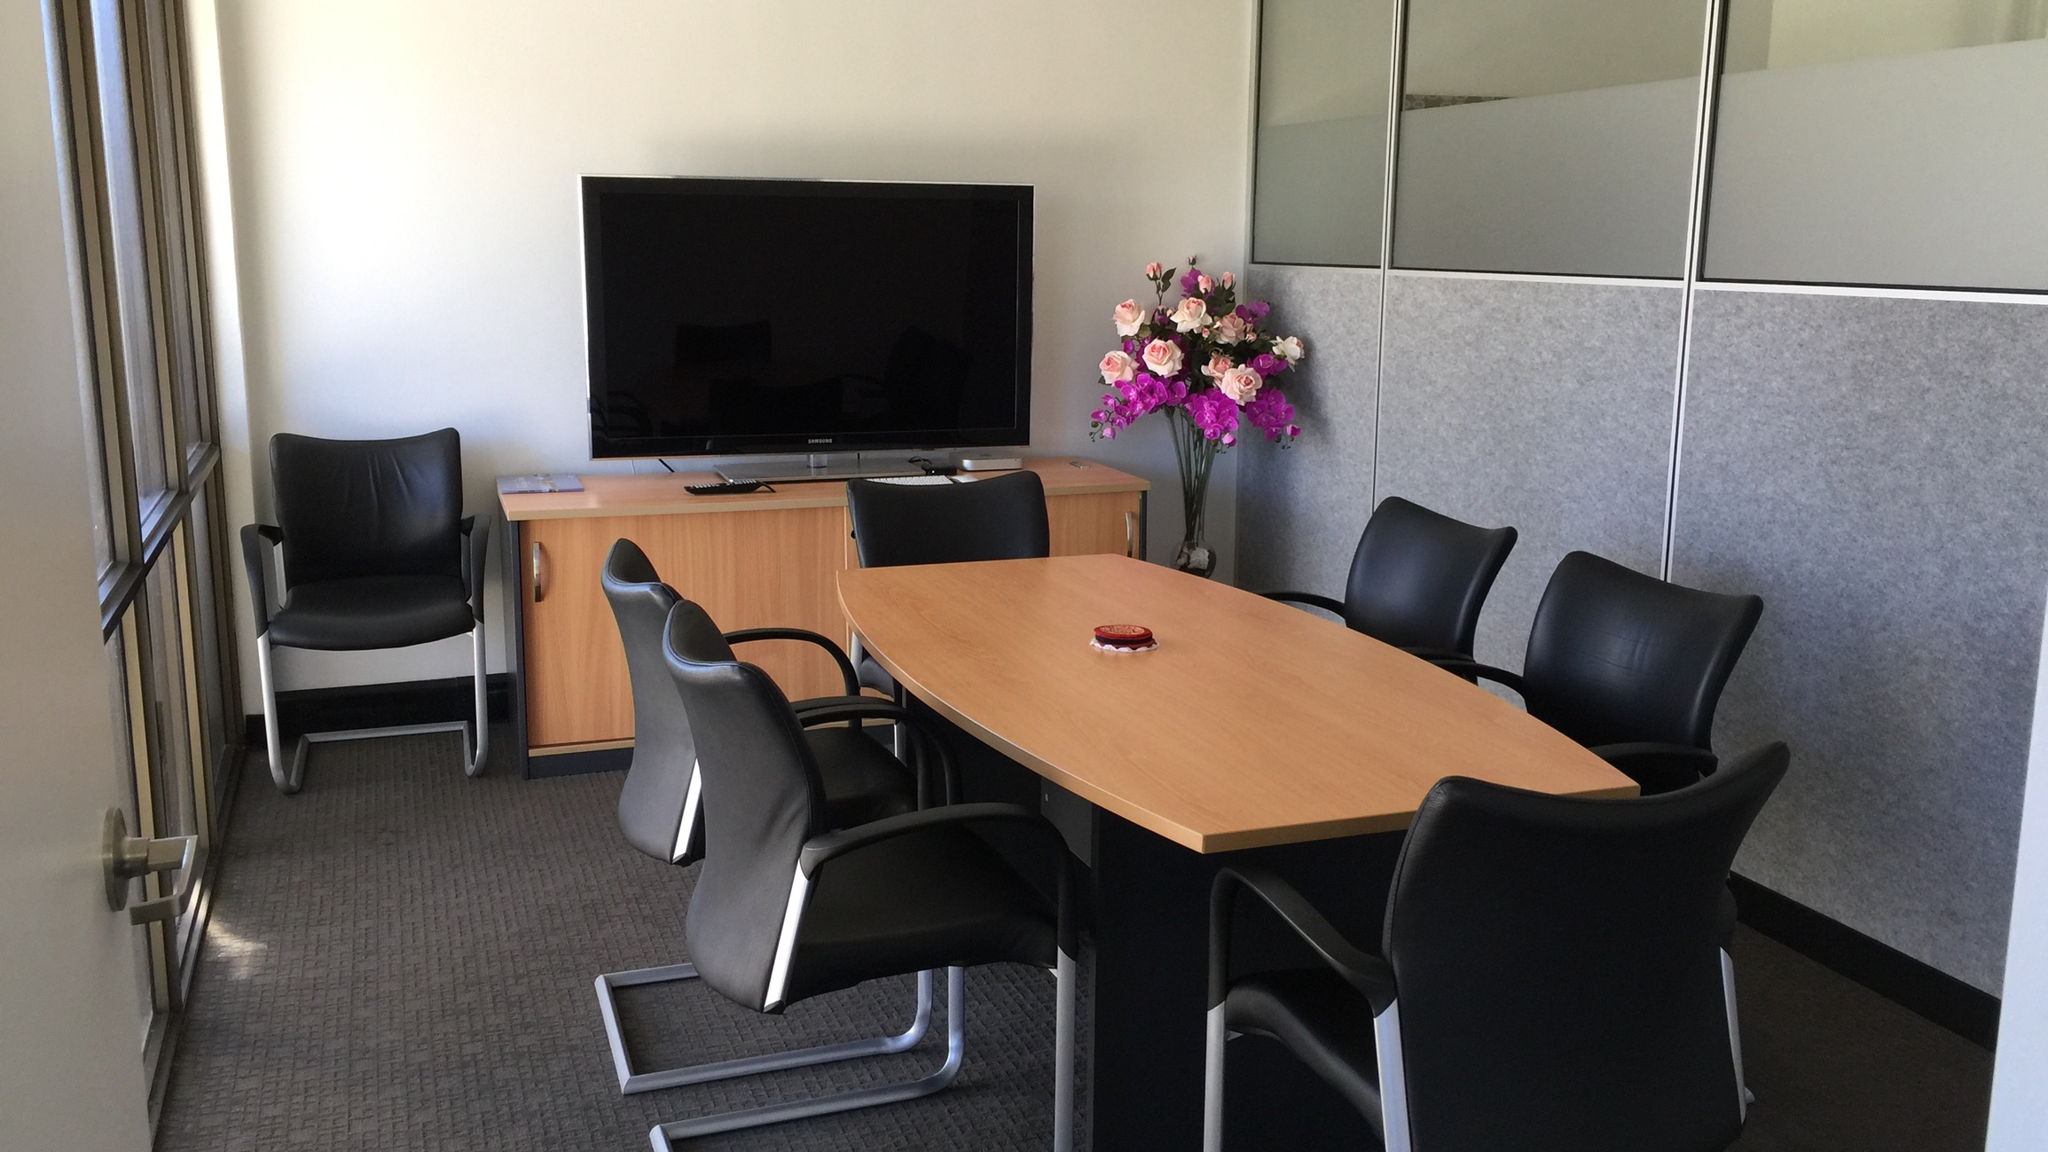 Small meeting room - perfect for six | SpacetoCo